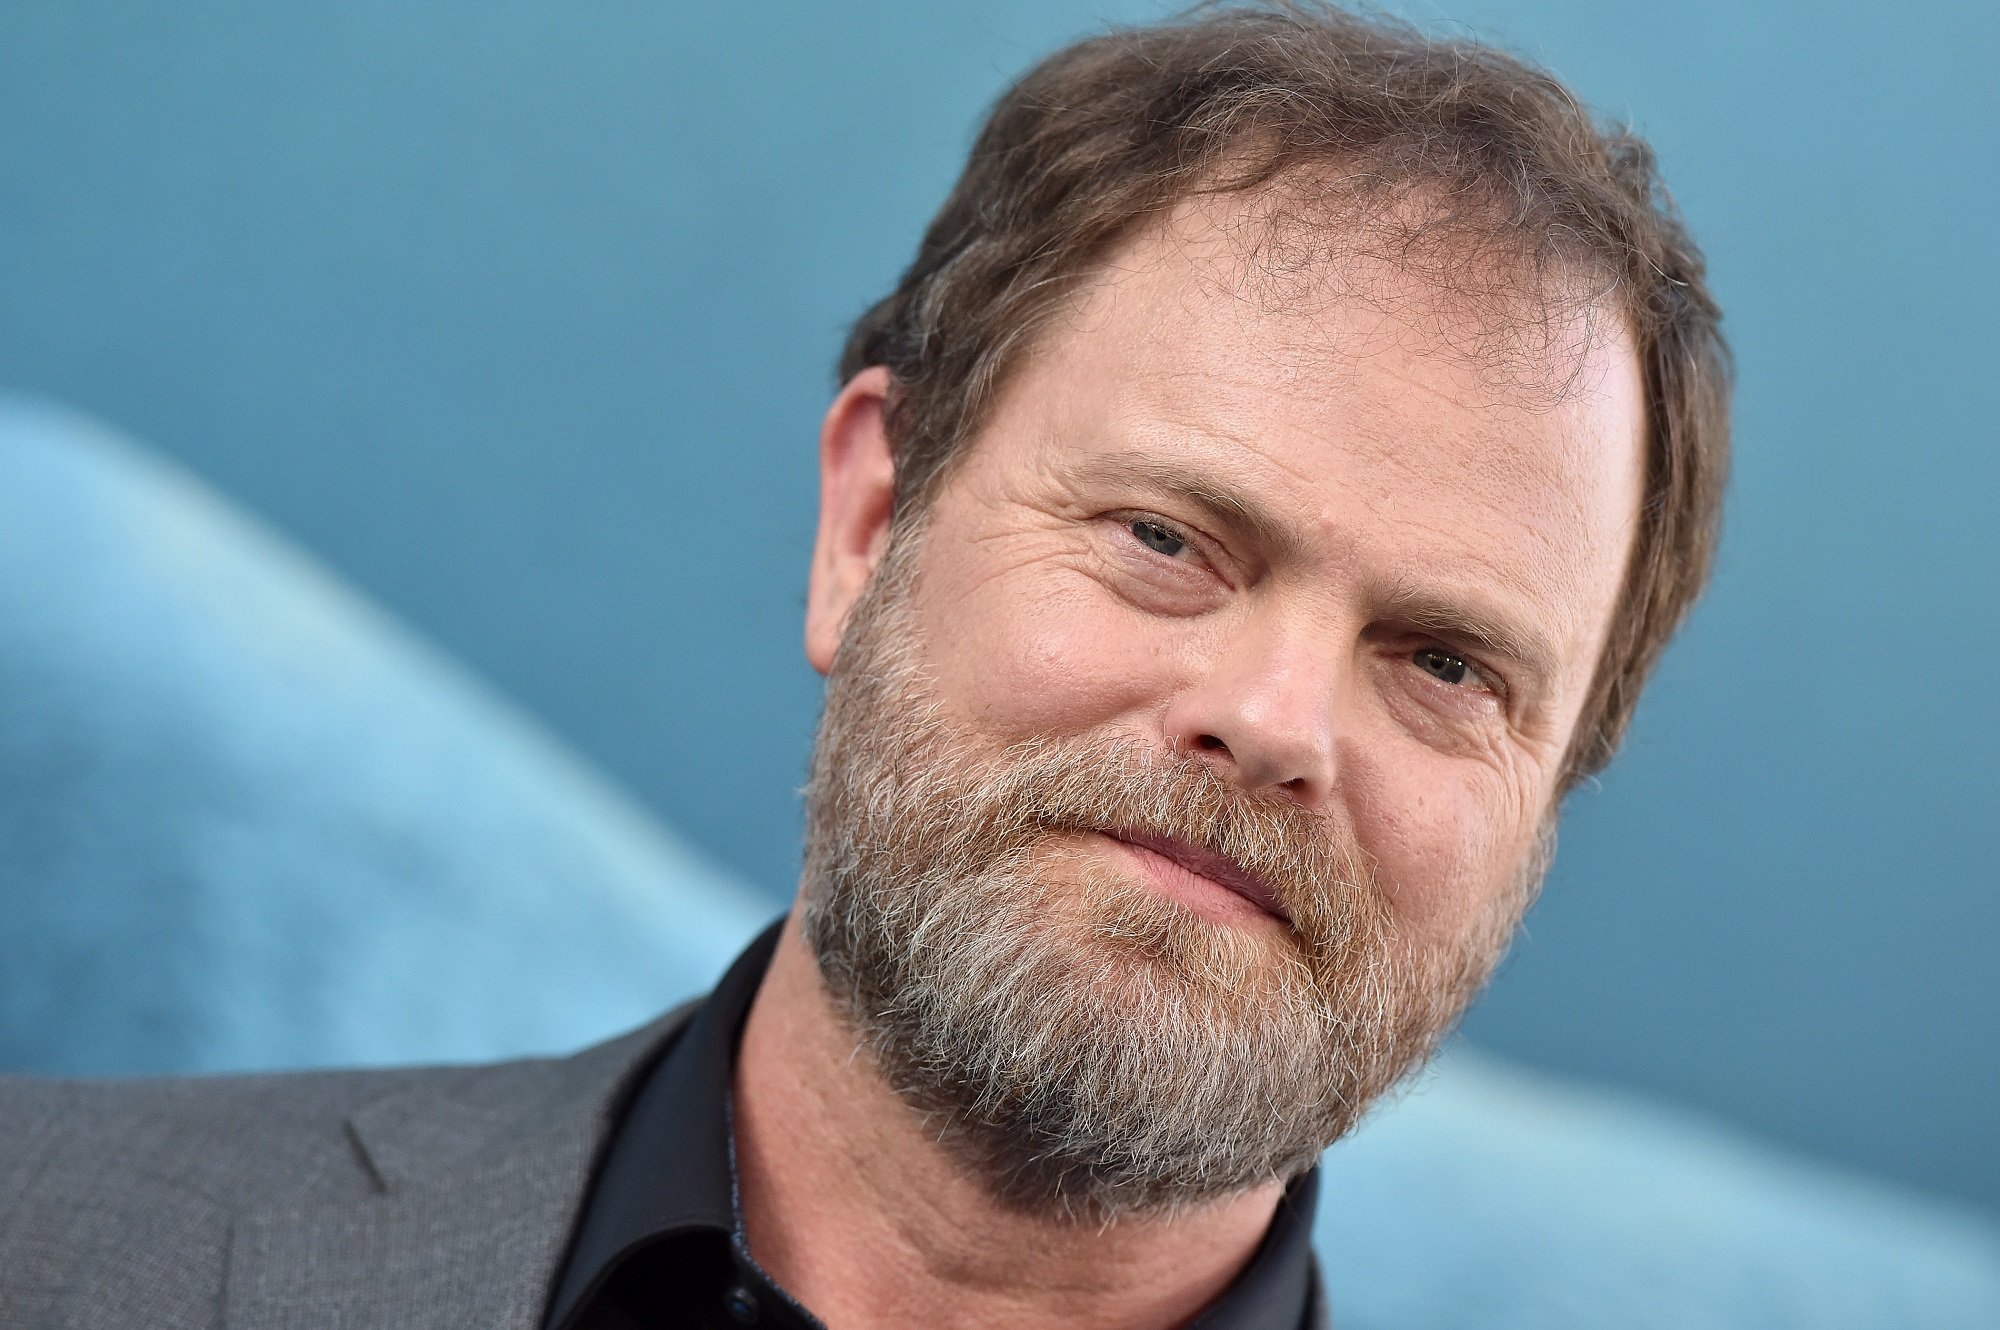 Rainn Wilson attends the premiere of Warner Bros. Pictures and Gravity Pictures' 'The Meg' at TCL Chinese Theatre IMAX on August 6, 2018 in Hollywood, California.  